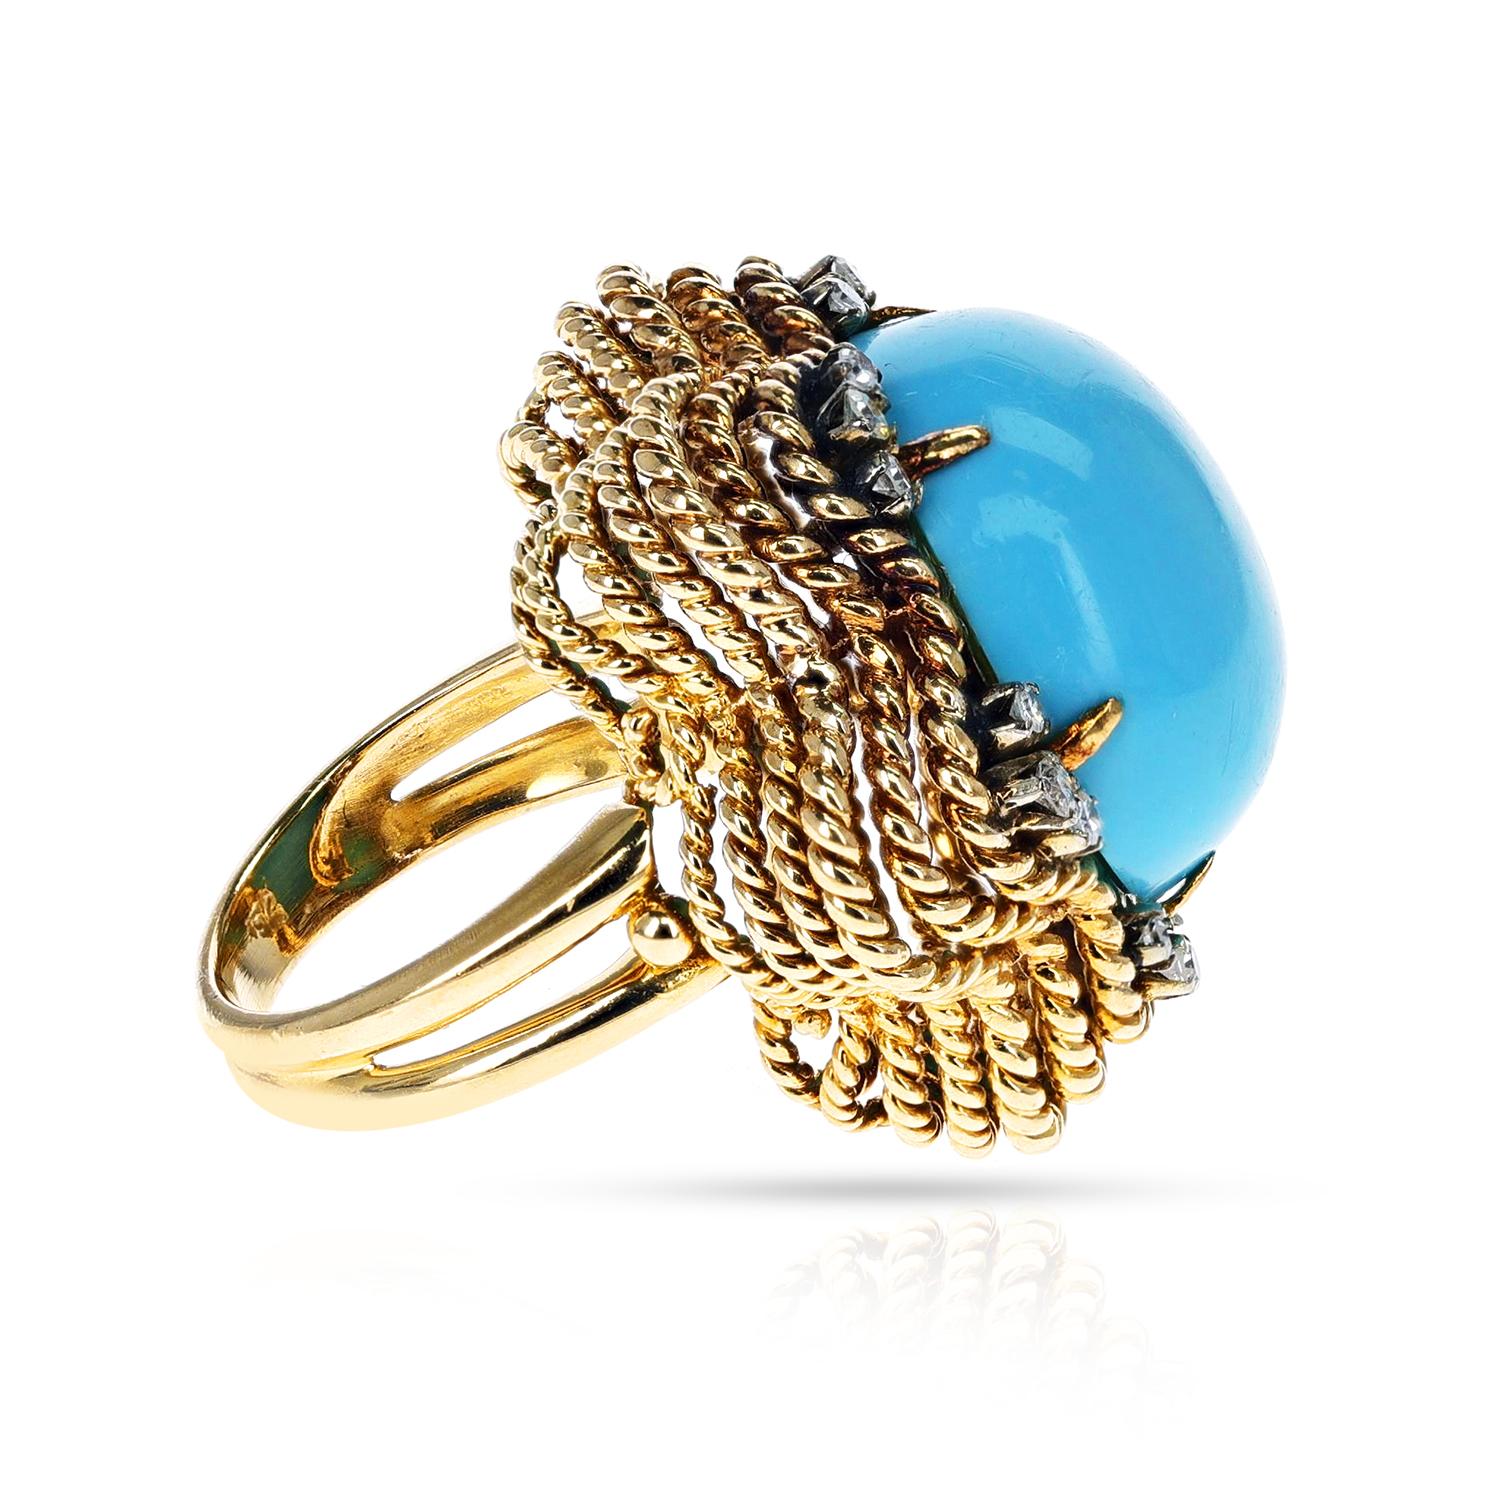 Cabochon 28 Ct. Turquoise and Diamond Cocktail Ring, 18k For Sale